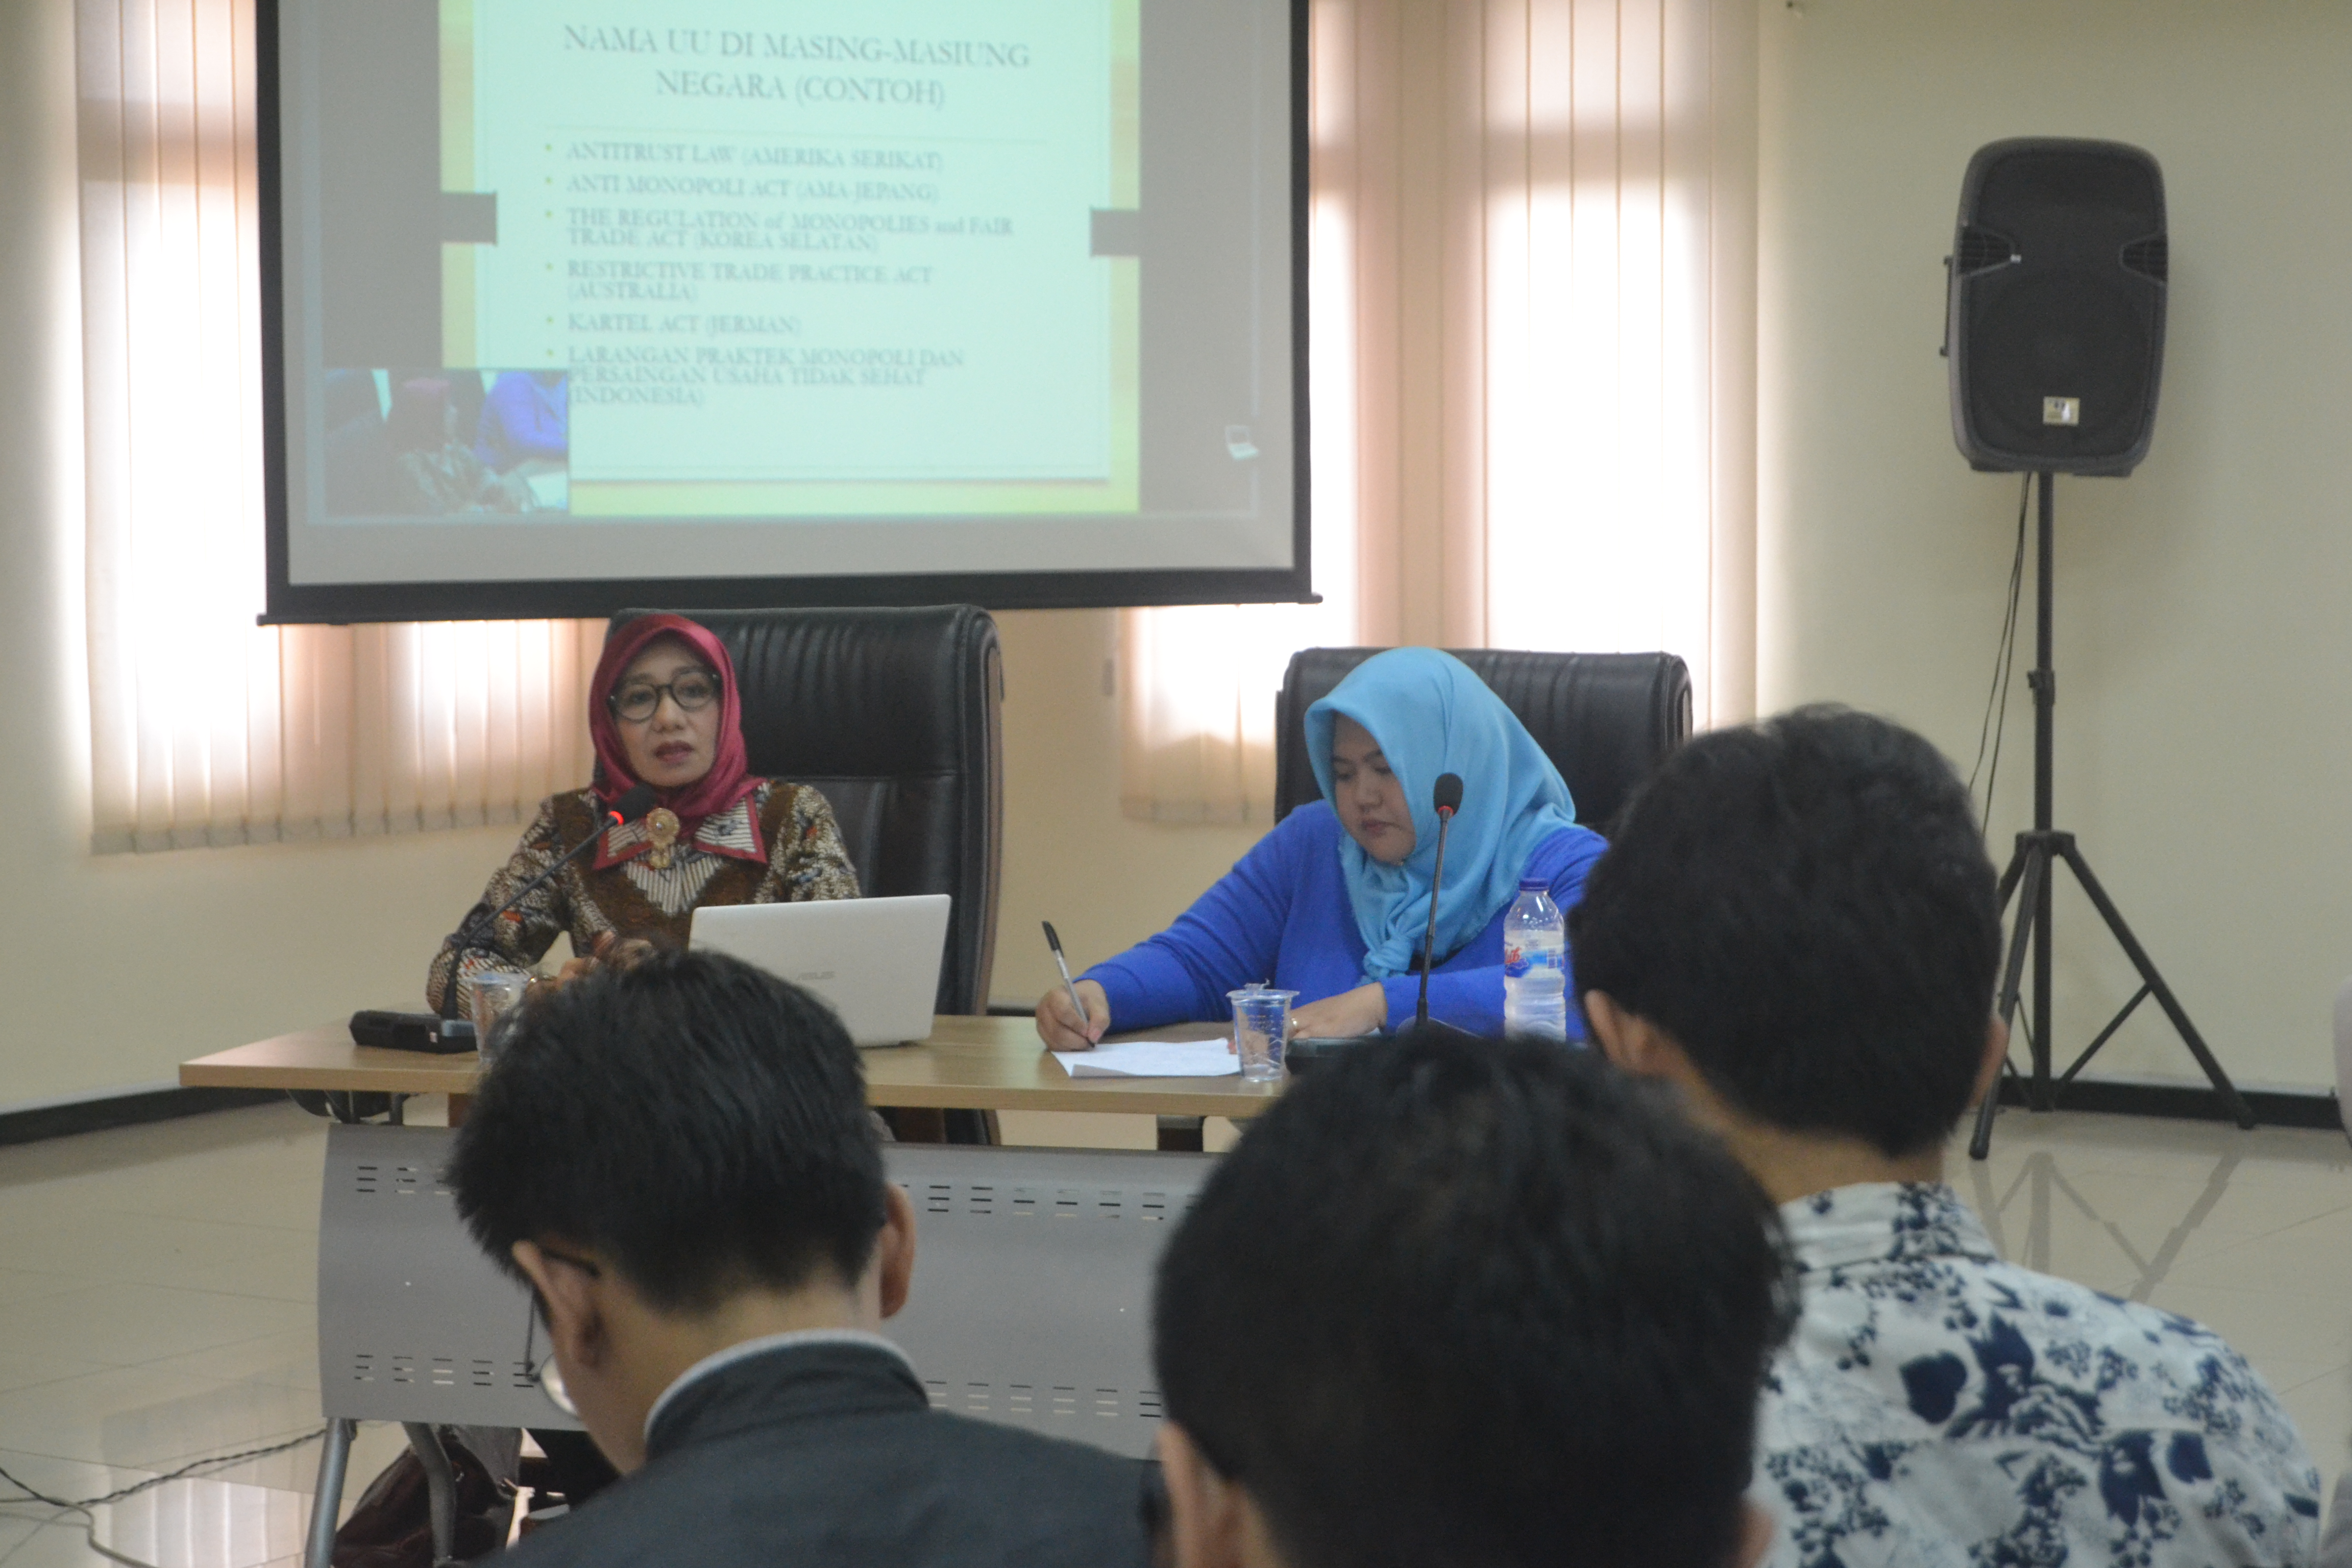 You are currently viewing Kuliah Umum Video Conference Dr. Sukarmi, S.H., M.Hum